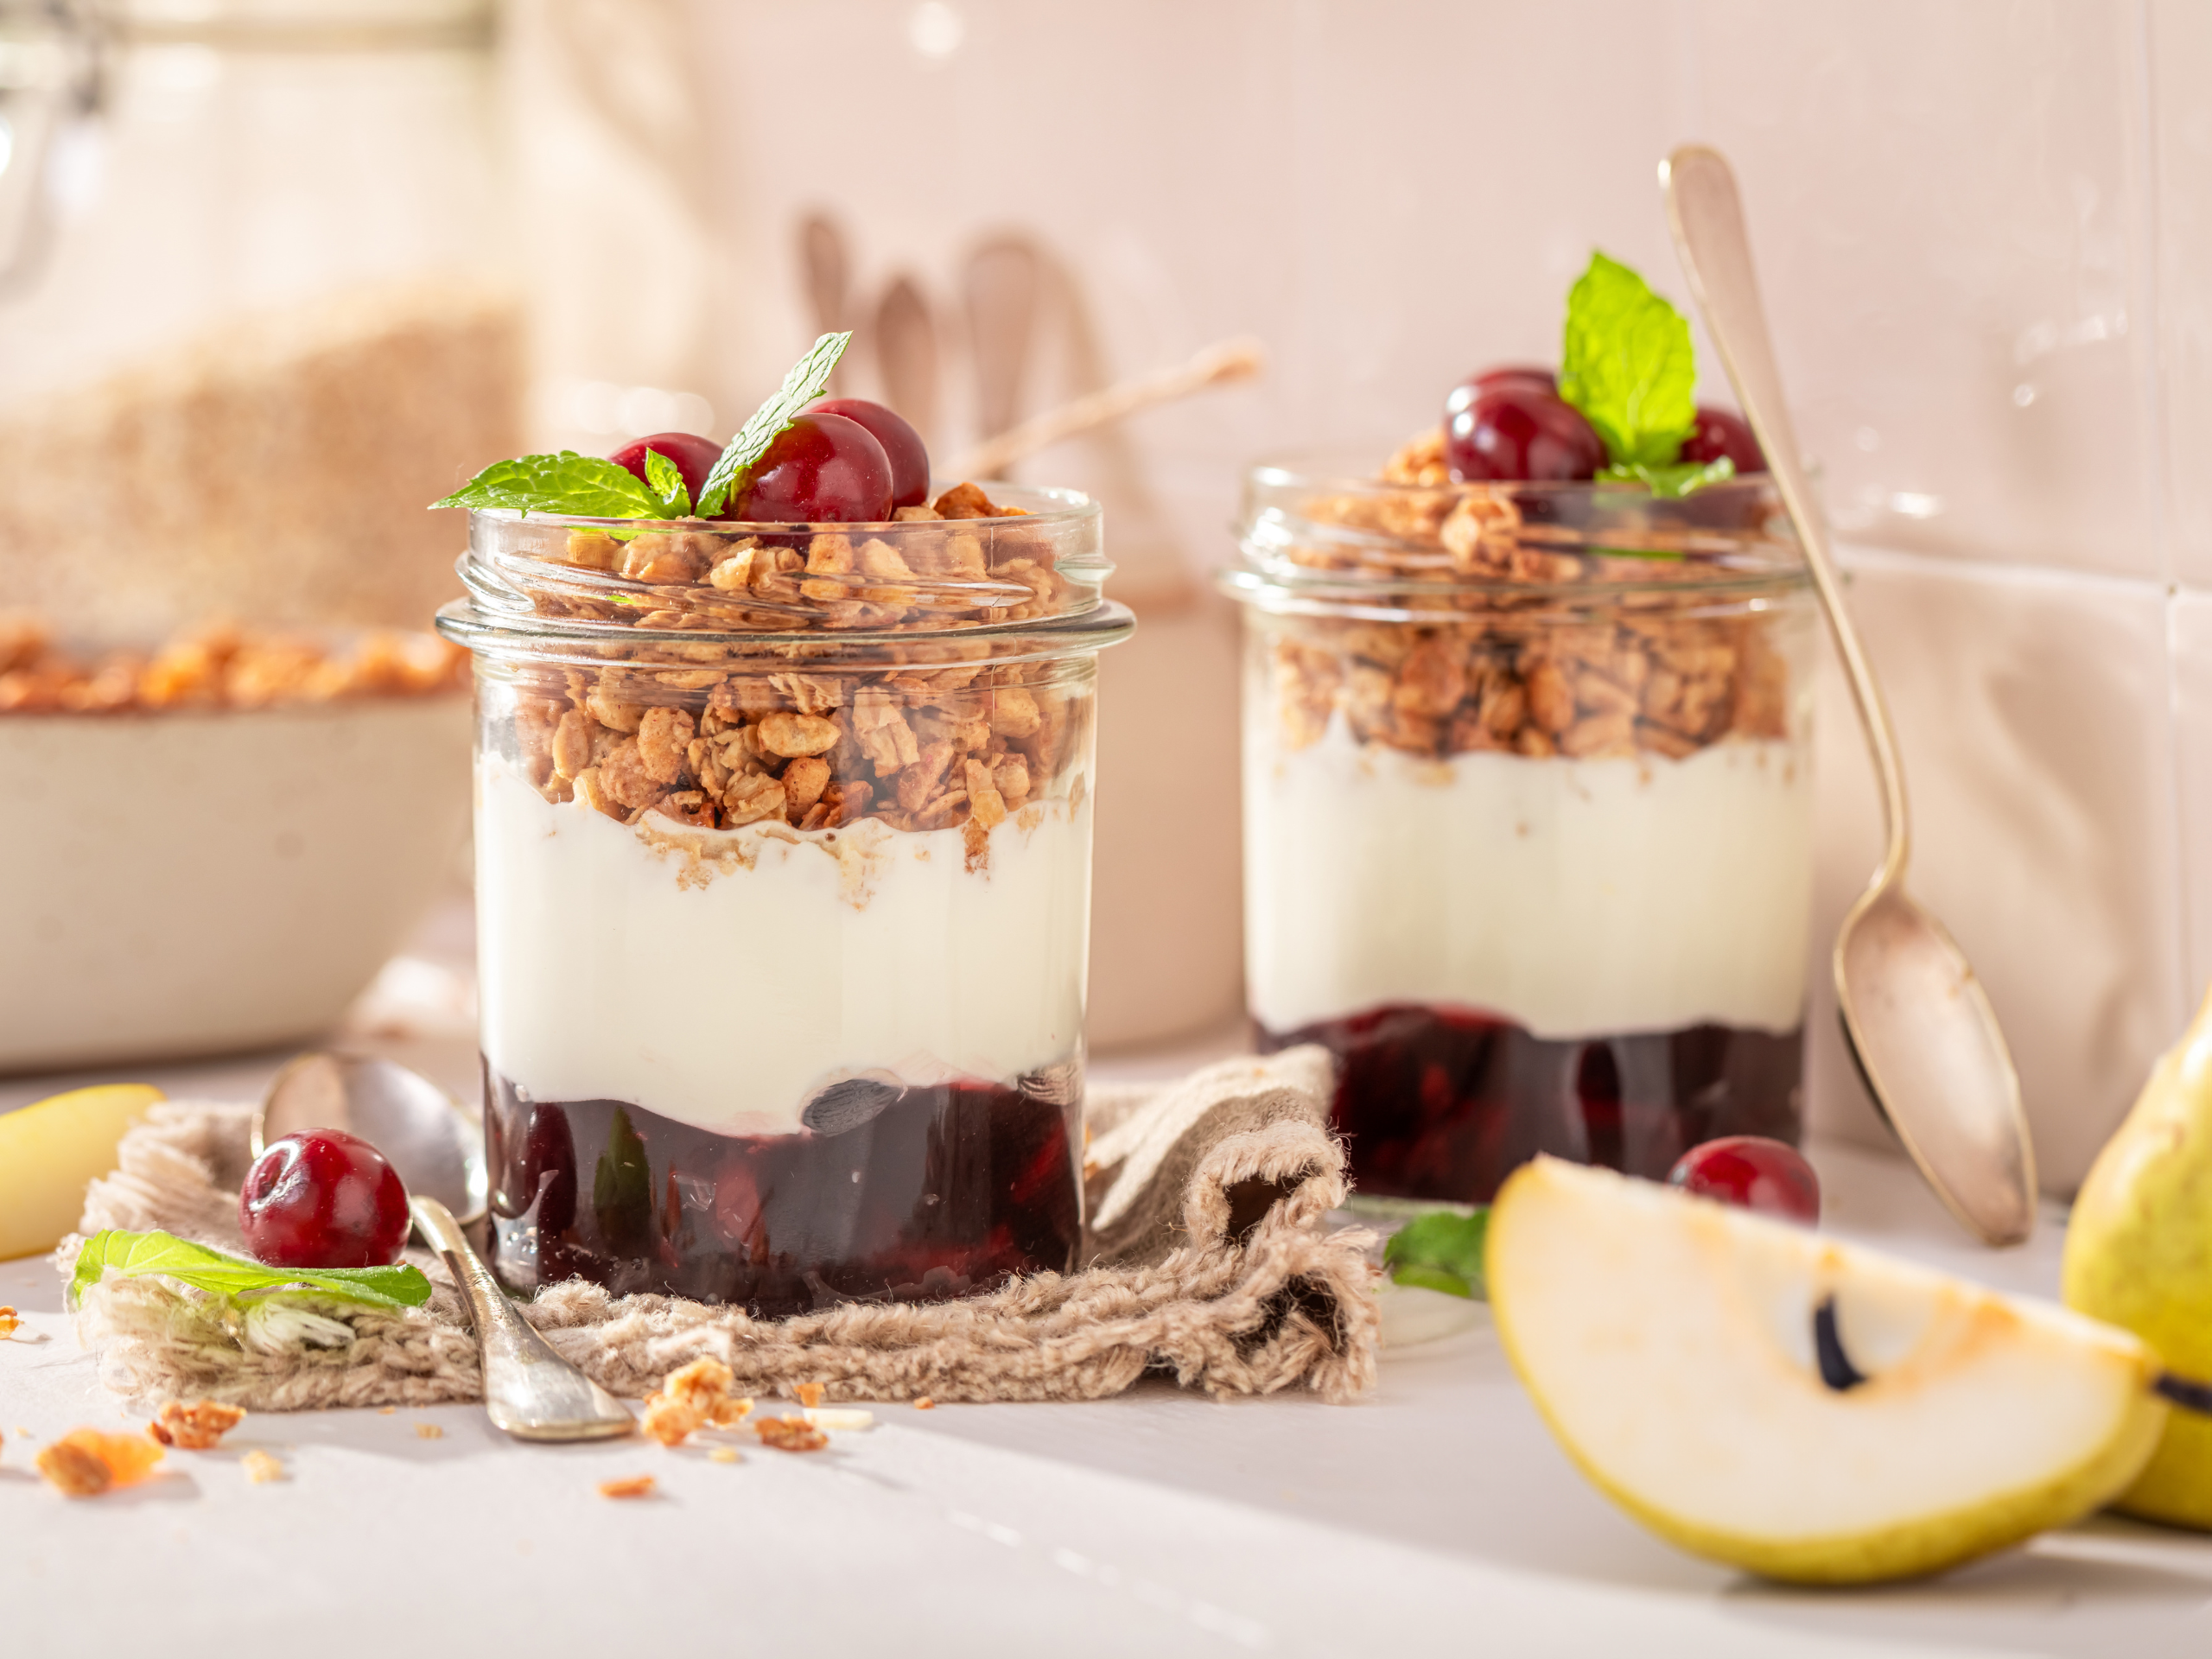 Winter Fruit and Oatmeal Parfait